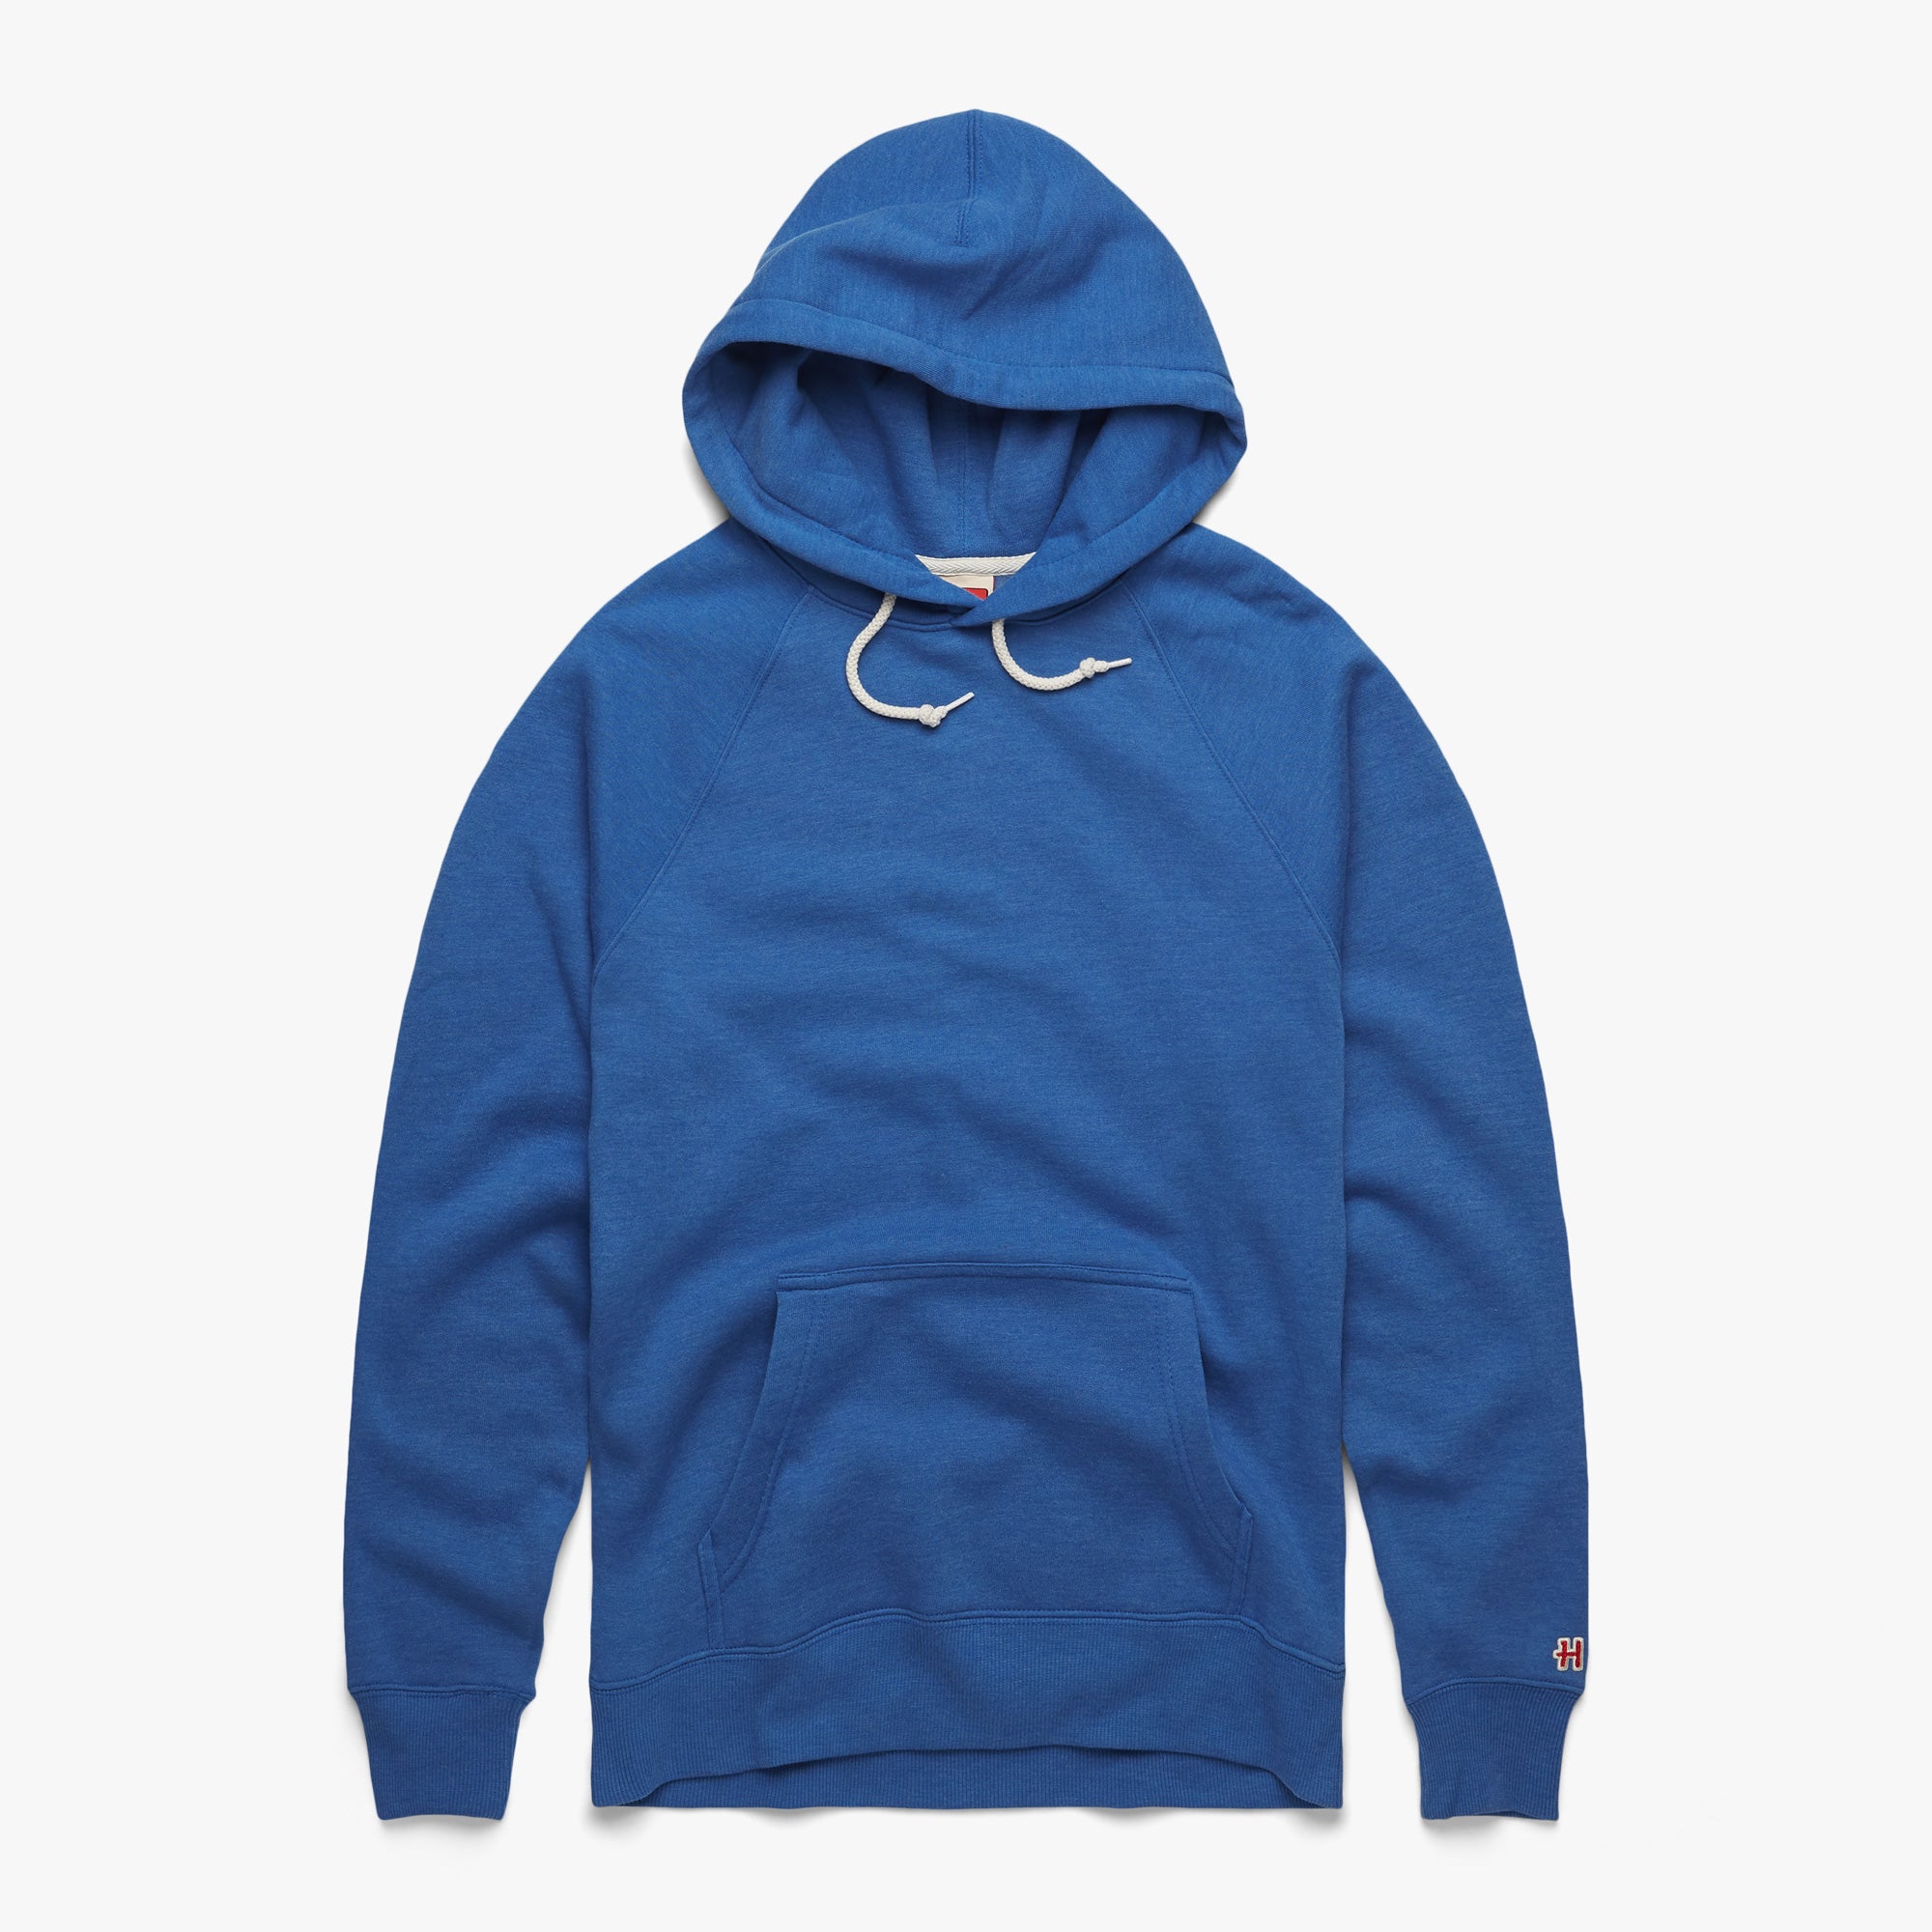 Go-To Hoodie